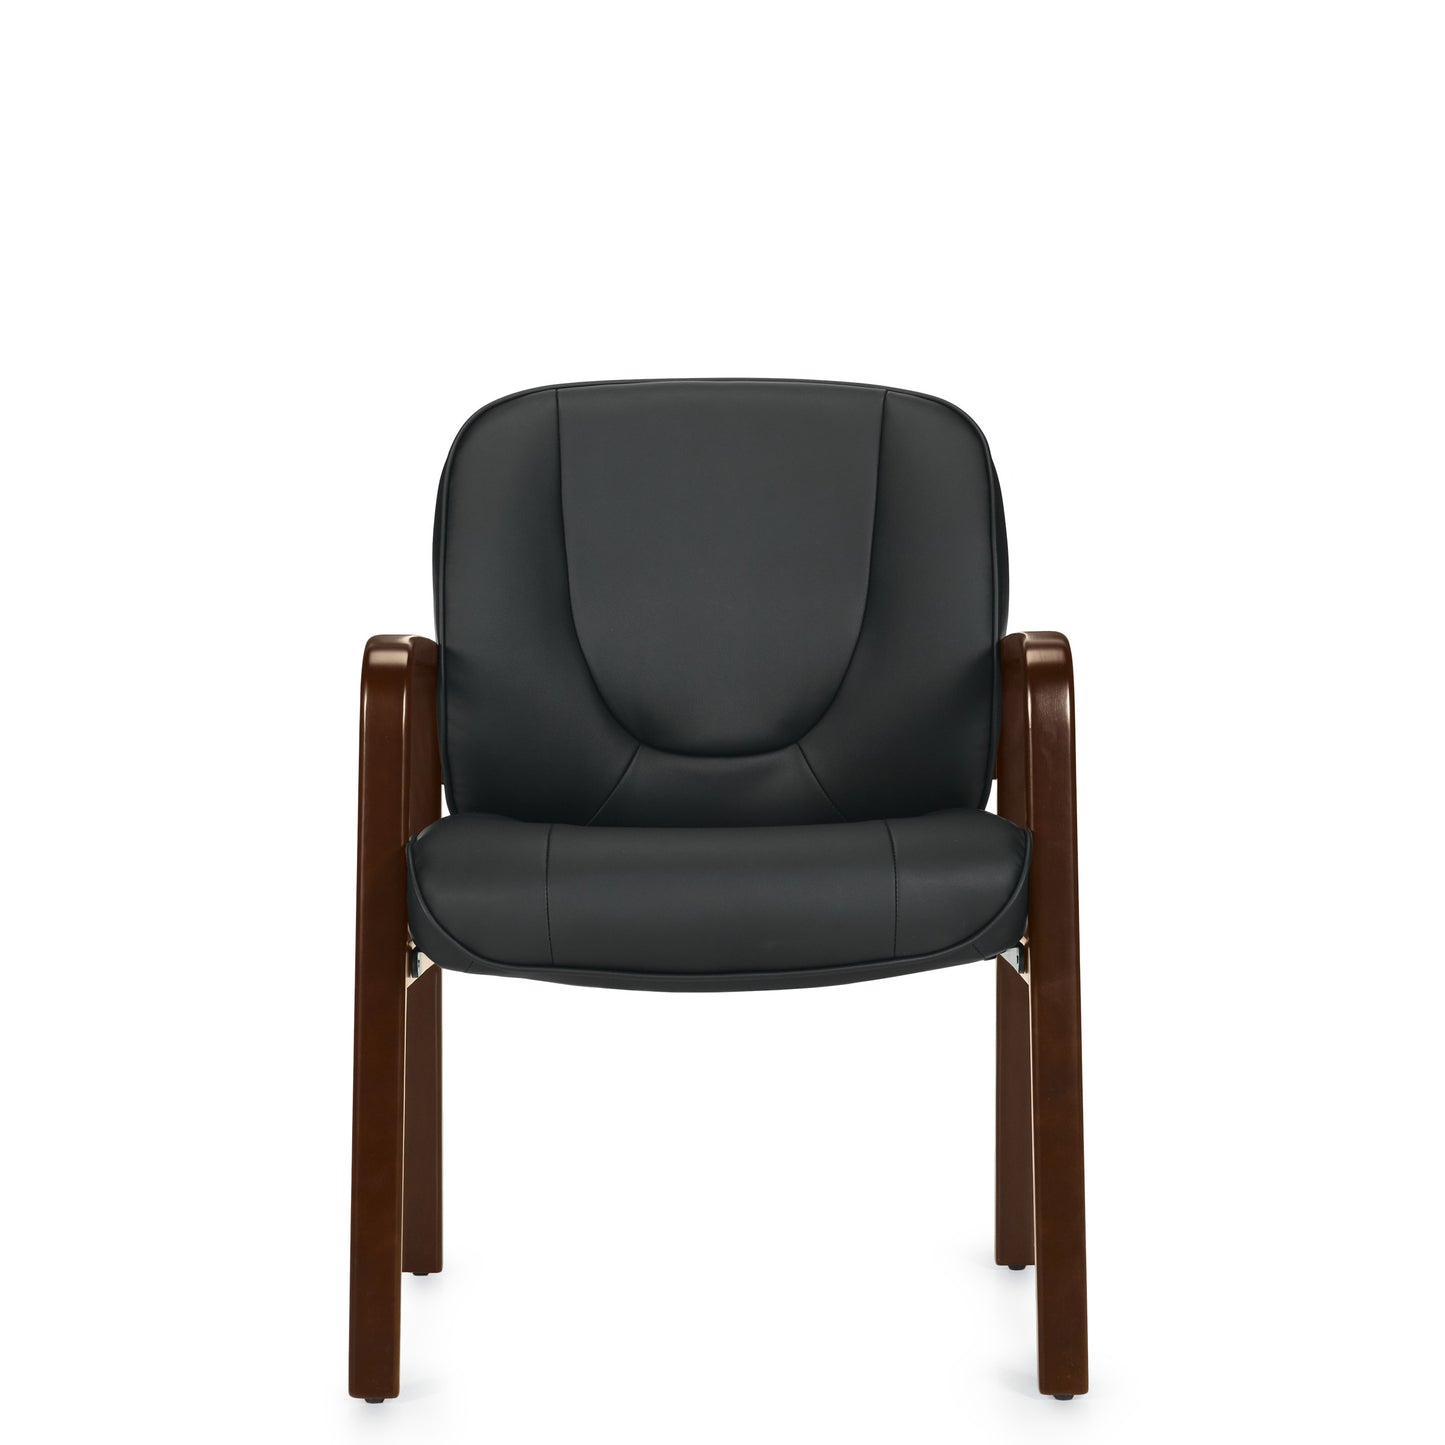 Luxhide Guest Chair with Wood Accents - OTG11770B